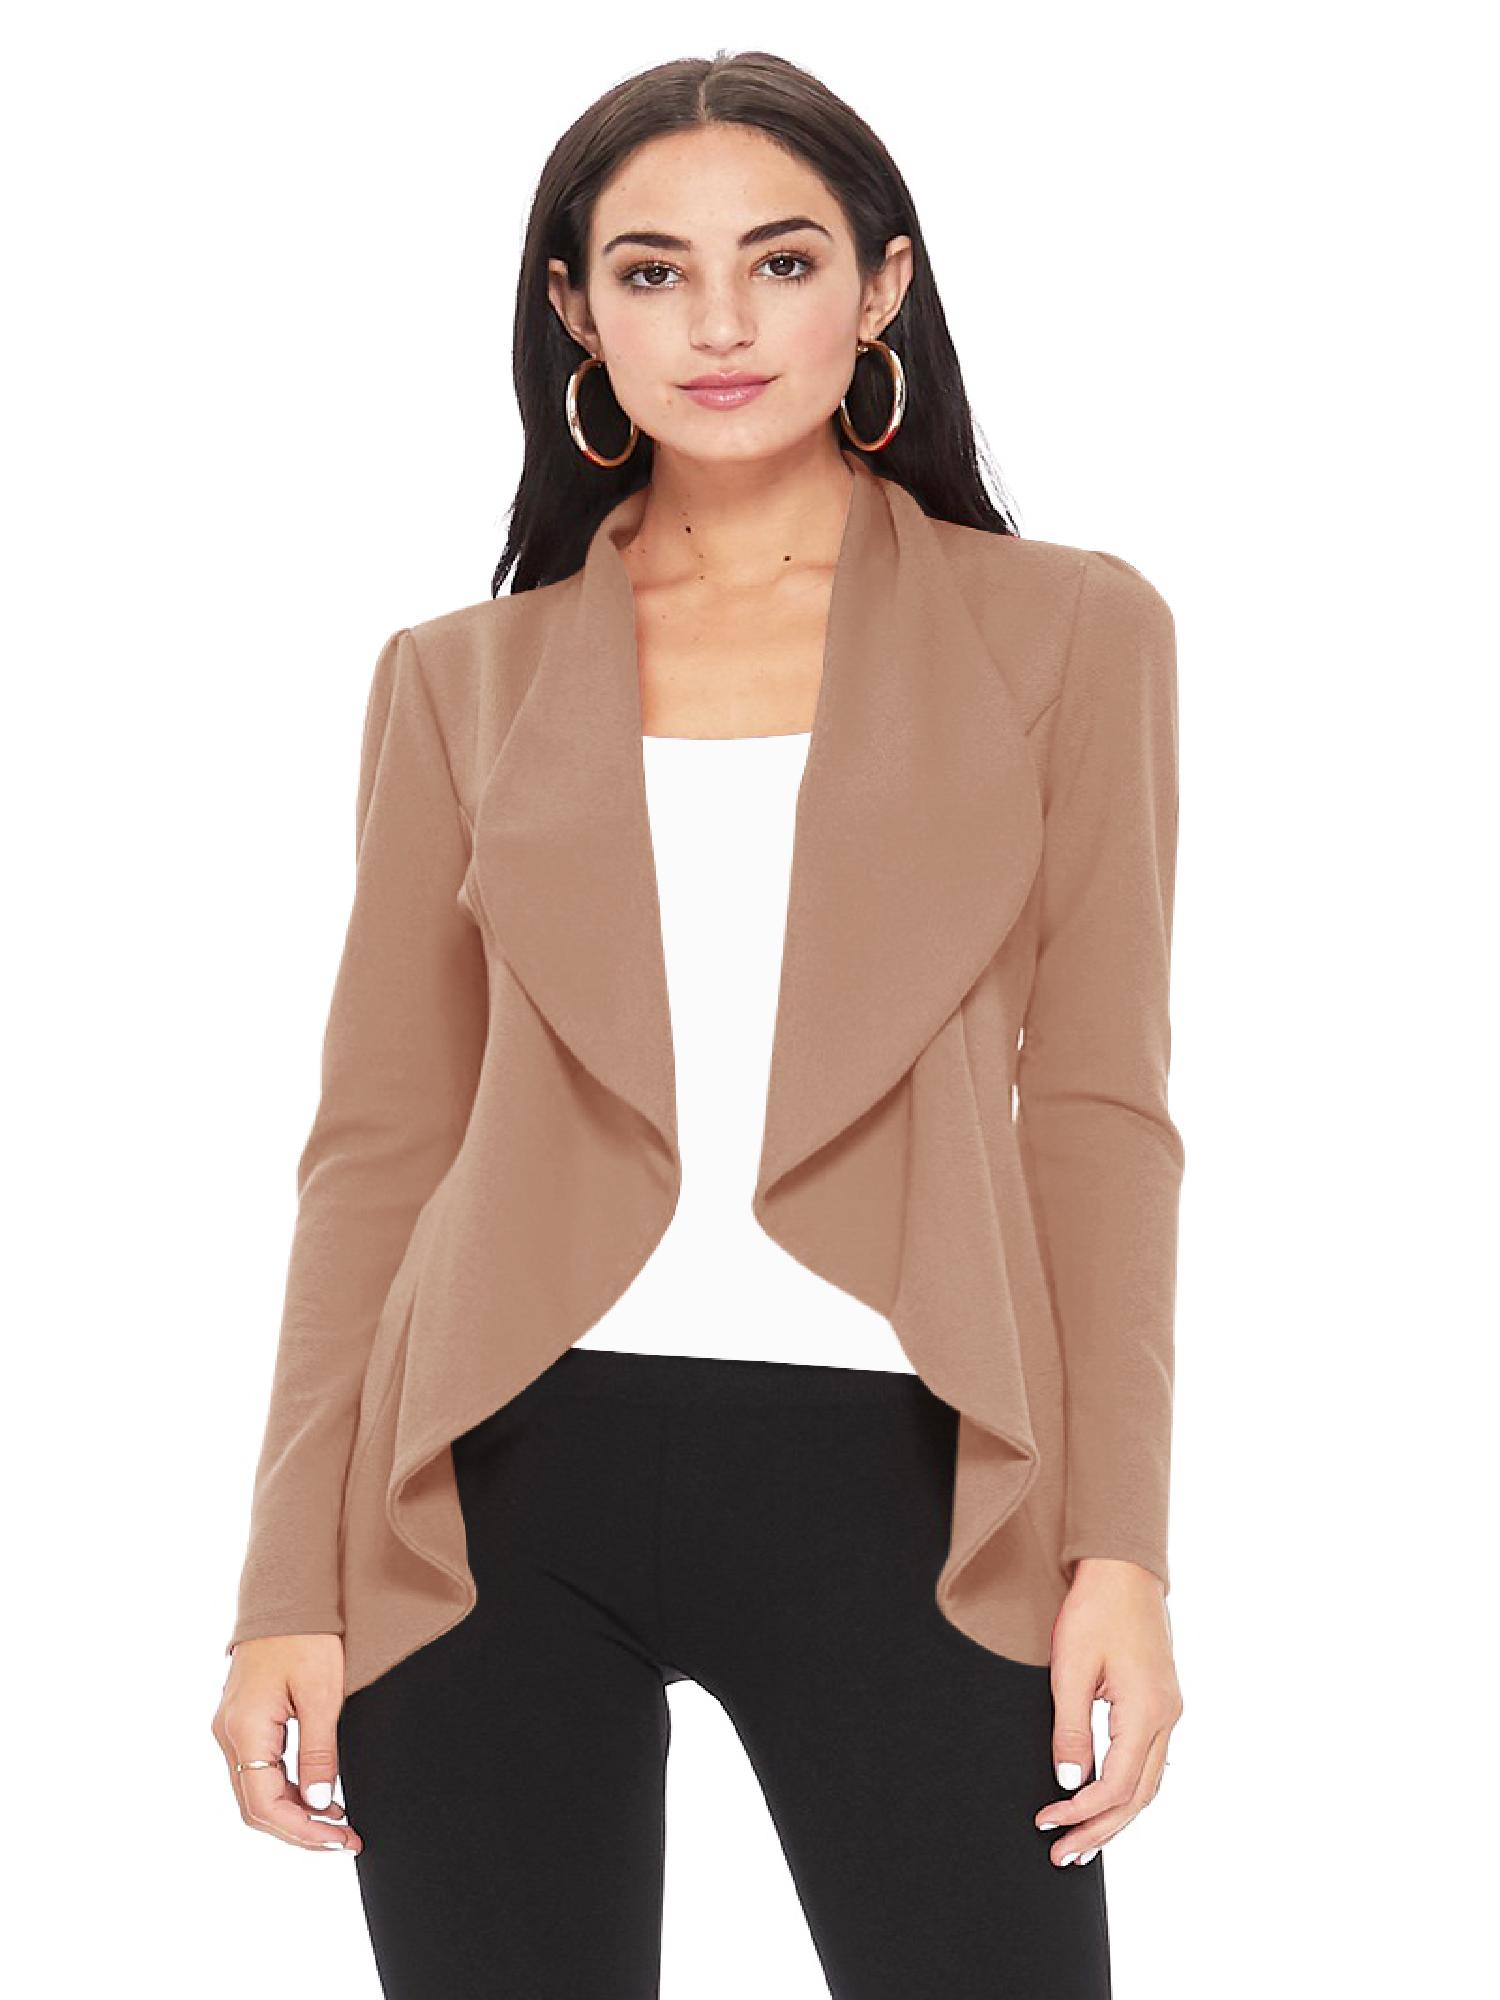 Womens Casual Long Sleeves Open Front Office Wear Solid Blazer Jacket S-3XL Made in USA